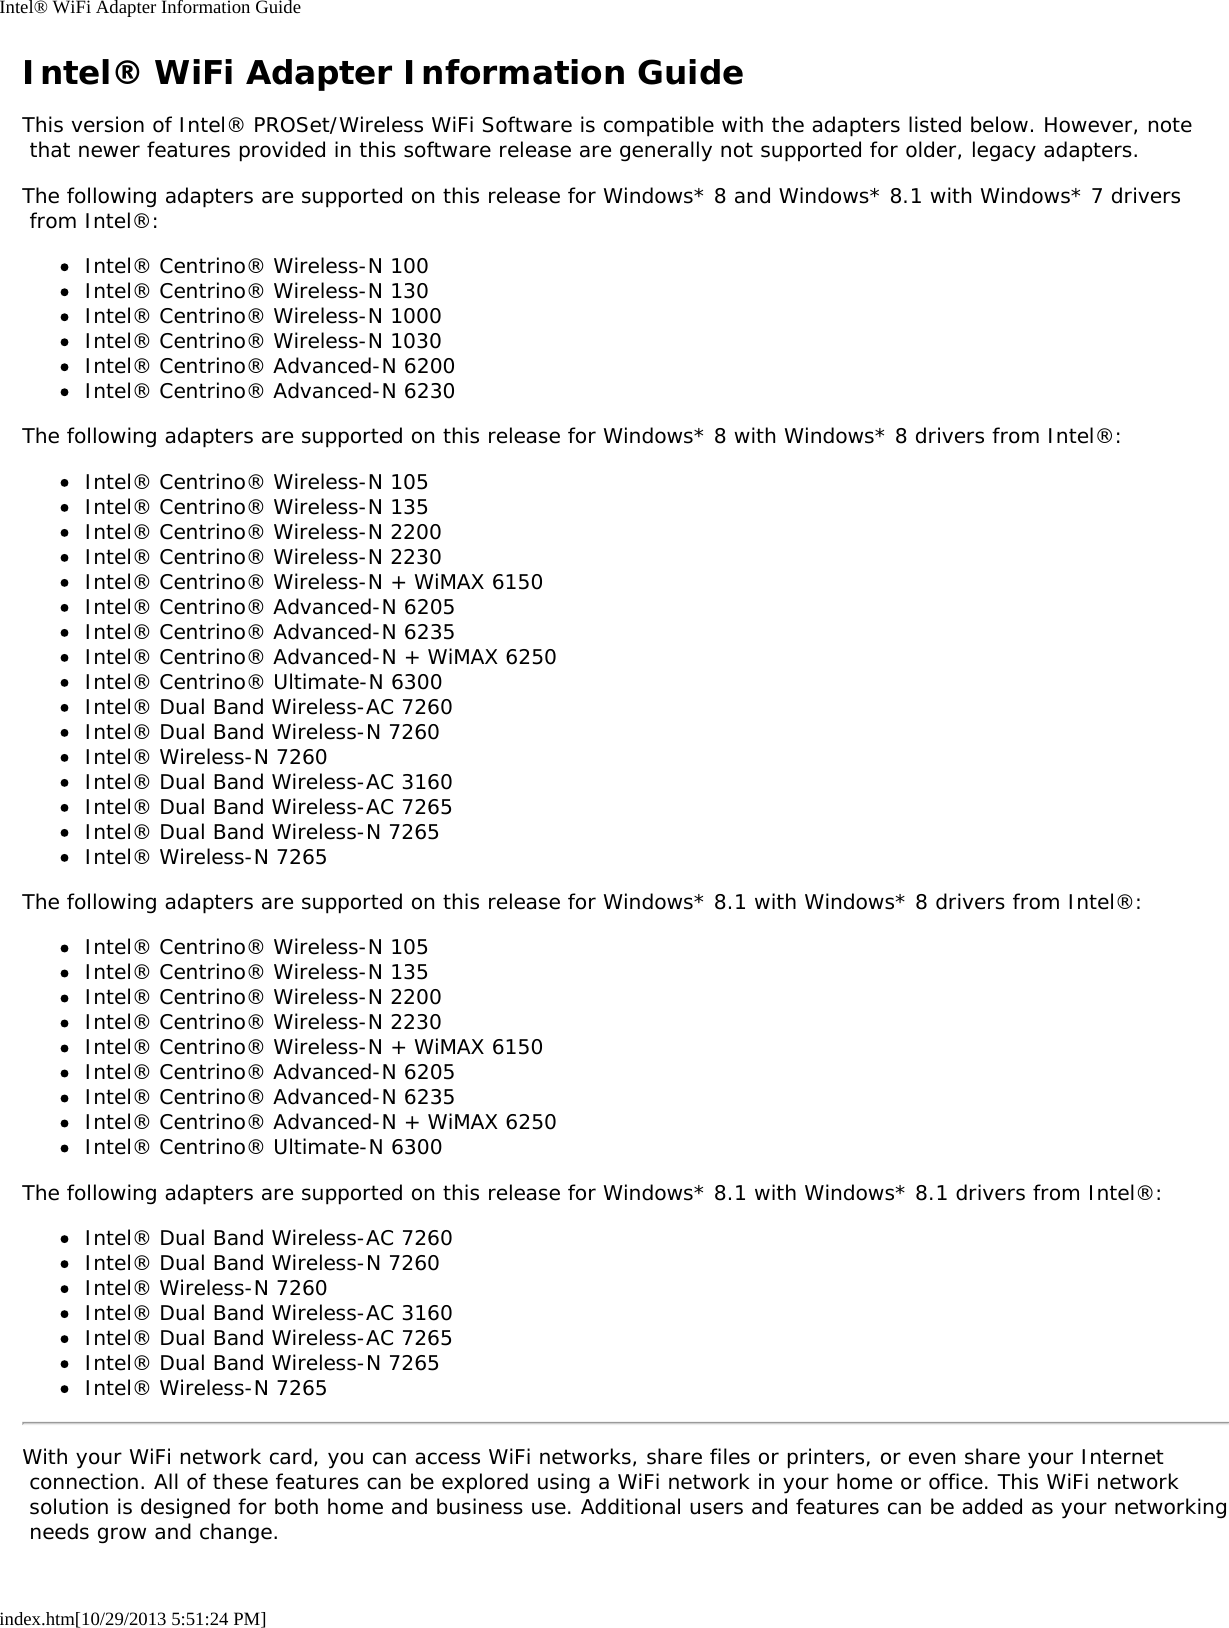 Intel® WiFi Adapter Information Guideindex.htm[10/29/2013 5:51:24 PM]Intel® WiFi Adapter Information GuideThis version of Intel® PROSet/Wireless WiFi Software is compatible with the adapters listed below. However, note that newer features provided in this software release are generally not supported for older, legacy adapters.The following adapters are supported on this release for Windows* 8 and Windows* 8.1 with Windows* 7 drivers from Intel®:Intel® Centrino® Wireless-N 100Intel® Centrino® Wireless-N 130Intel® Centrino® Wireless-N 1000Intel® Centrino® Wireless-N 1030Intel® Centrino® Advanced-N 6200Intel® Centrino® Advanced-N 6230The following adapters are supported on this release for Windows* 8 with Windows* 8 drivers from Intel®:Intel® Centrino® Wireless-N 105Intel® Centrino® Wireless-N 135Intel® Centrino® Wireless-N 2200Intel® Centrino® Wireless-N 2230Intel® Centrino® Wireless-N + WiMAX 6150Intel® Centrino® Advanced-N 6205Intel® Centrino® Advanced-N 6235Intel® Centrino® Advanced-N + WiMAX 6250Intel® Centrino® Ultimate-N 6300Intel® Dual Band Wireless-AC 7260Intel® Dual Band Wireless-N 7260Intel® Wireless-N 7260Intel® Dual Band Wireless-AC 3160Intel® Dual Band Wireless-AC 7265Intel® Dual Band Wireless-N 7265Intel® Wireless-N 7265The following adapters are supported on this release for Windows* 8.1 with Windows* 8 drivers from Intel®:Intel® Centrino® Wireless-N 105Intel® Centrino® Wireless-N 135Intel® Centrino® Wireless-N 2200Intel® Centrino® Wireless-N 2230Intel® Centrino® Wireless-N + WiMAX 6150Intel® Centrino® Advanced-N 6205Intel® Centrino® Advanced-N 6235Intel® Centrino® Advanced-N + WiMAX 6250Intel® Centrino® Ultimate-N 6300The following adapters are supported on this release for Windows* 8.1 with Windows* 8.1 drivers from Intel®:Intel® Dual Band Wireless-AC 7260Intel® Dual Band Wireless-N 7260Intel® Wireless-N 7260Intel® Dual Band Wireless-AC 3160Intel® Dual Band Wireless-AC 7265Intel® Dual Band Wireless-N 7265Intel® Wireless-N 7265With your WiFi network card, you can access WiFi networks, share files or printers, or even share your Internet connection. All of these features can be explored using a WiFi network in your home or office. This WiFi network solution is designed for both home and business use. Additional users and features can be added as your networking needs grow and change.